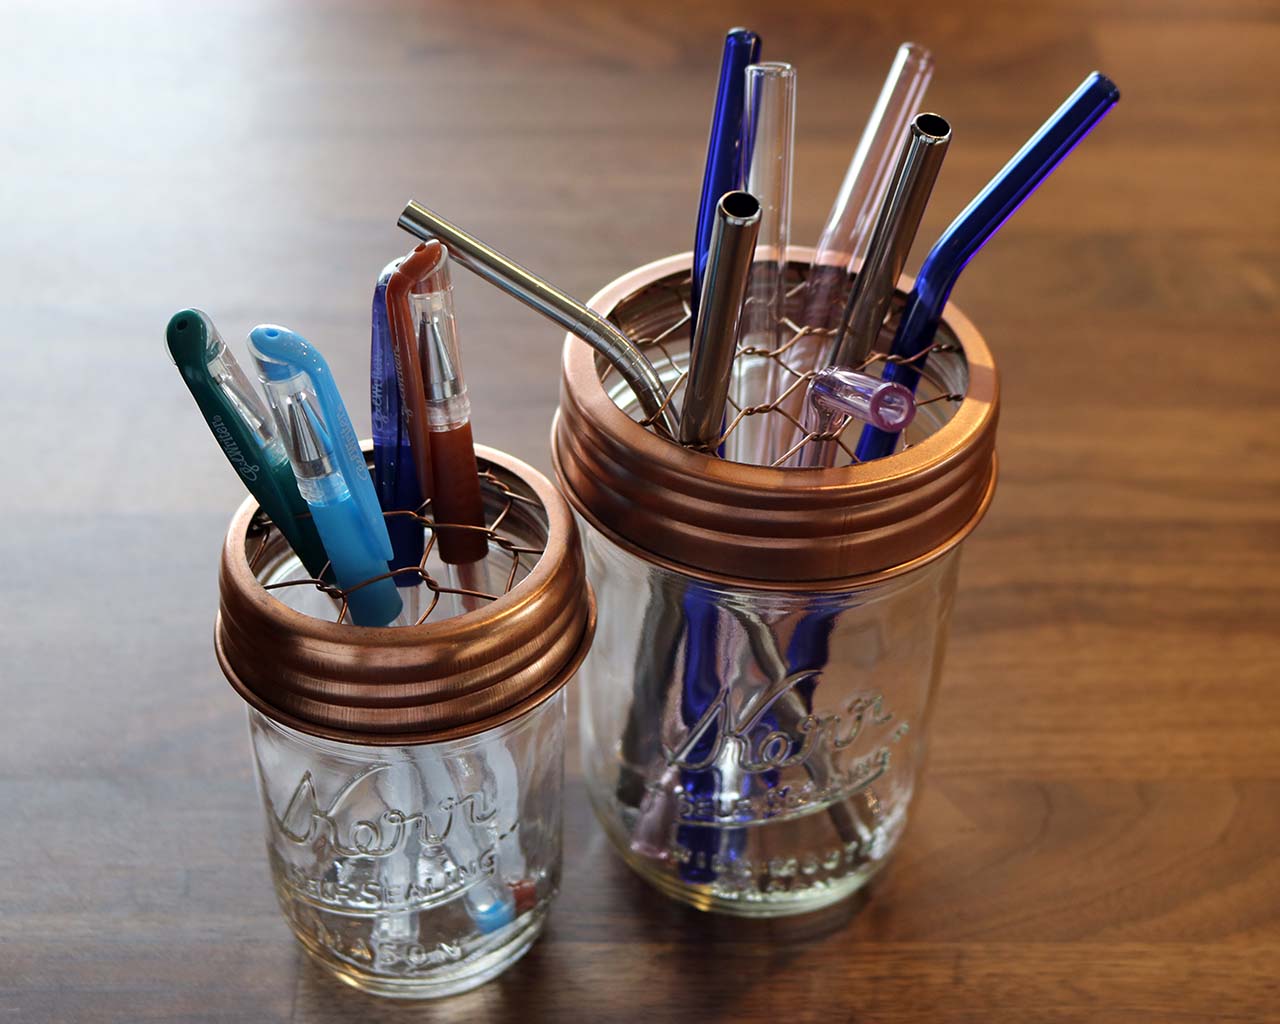 Shiny copper frog / flower / desk / straw organizer lids for regular and wide mouth Mason jars with pens and reusable straws